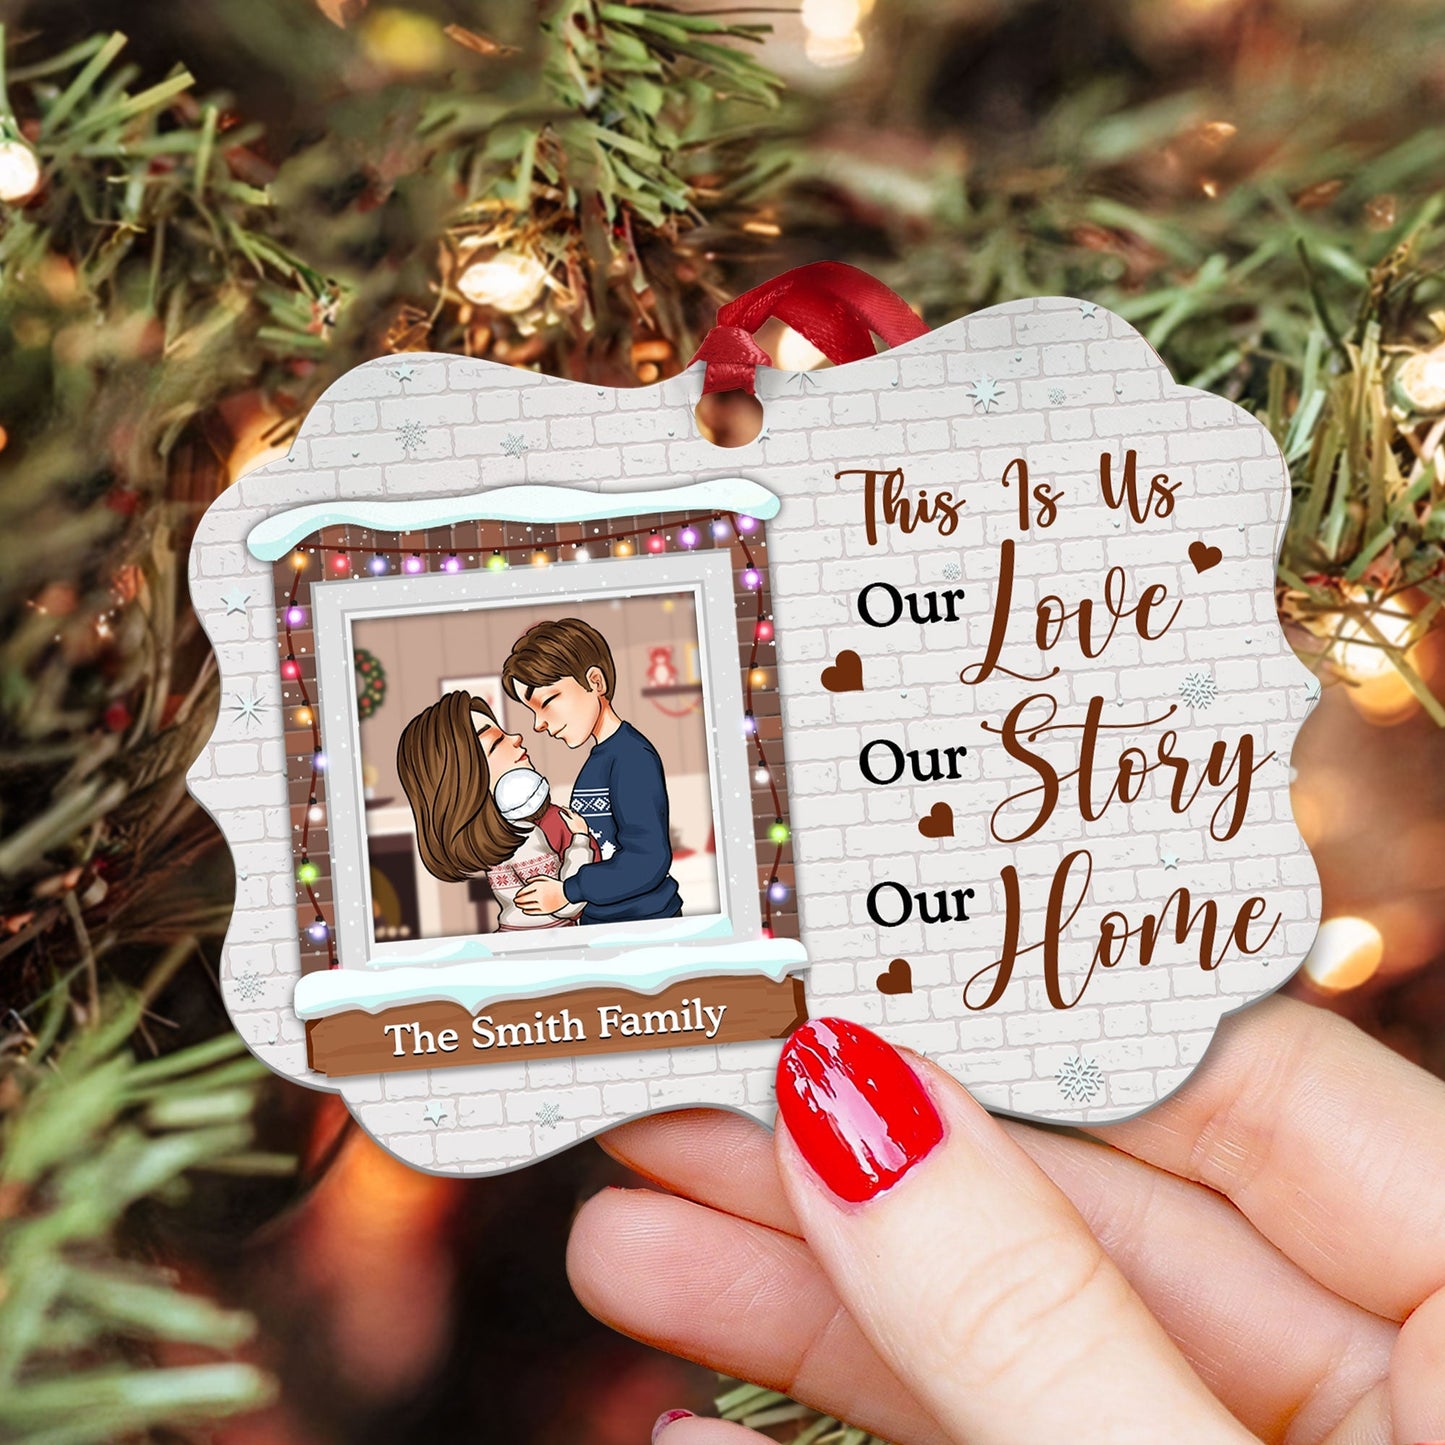 Our Love Our Story Our Home - Personalized Aluminum/Wooden Ornament - Christmas Gift For Family, Newly Wed, Newborn Baby, Husband, Wife, Heartwarming Gift